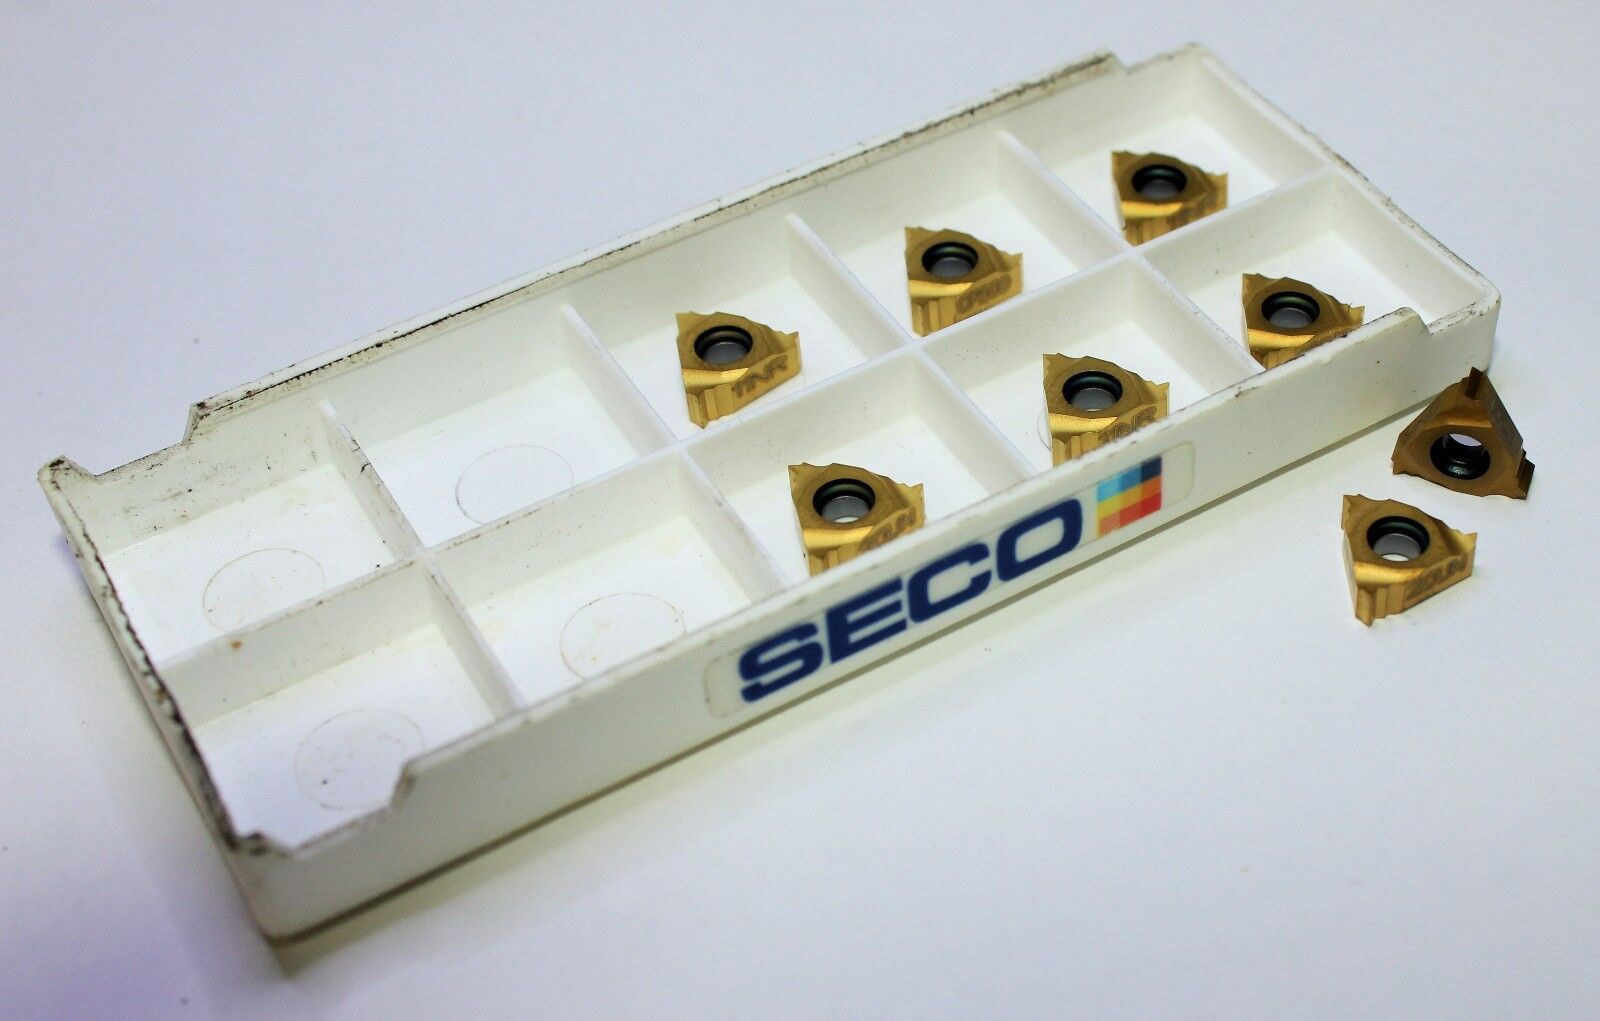 SECO Thread Turning Inserts, 11NR20UN, CP500 (Lot of 8)